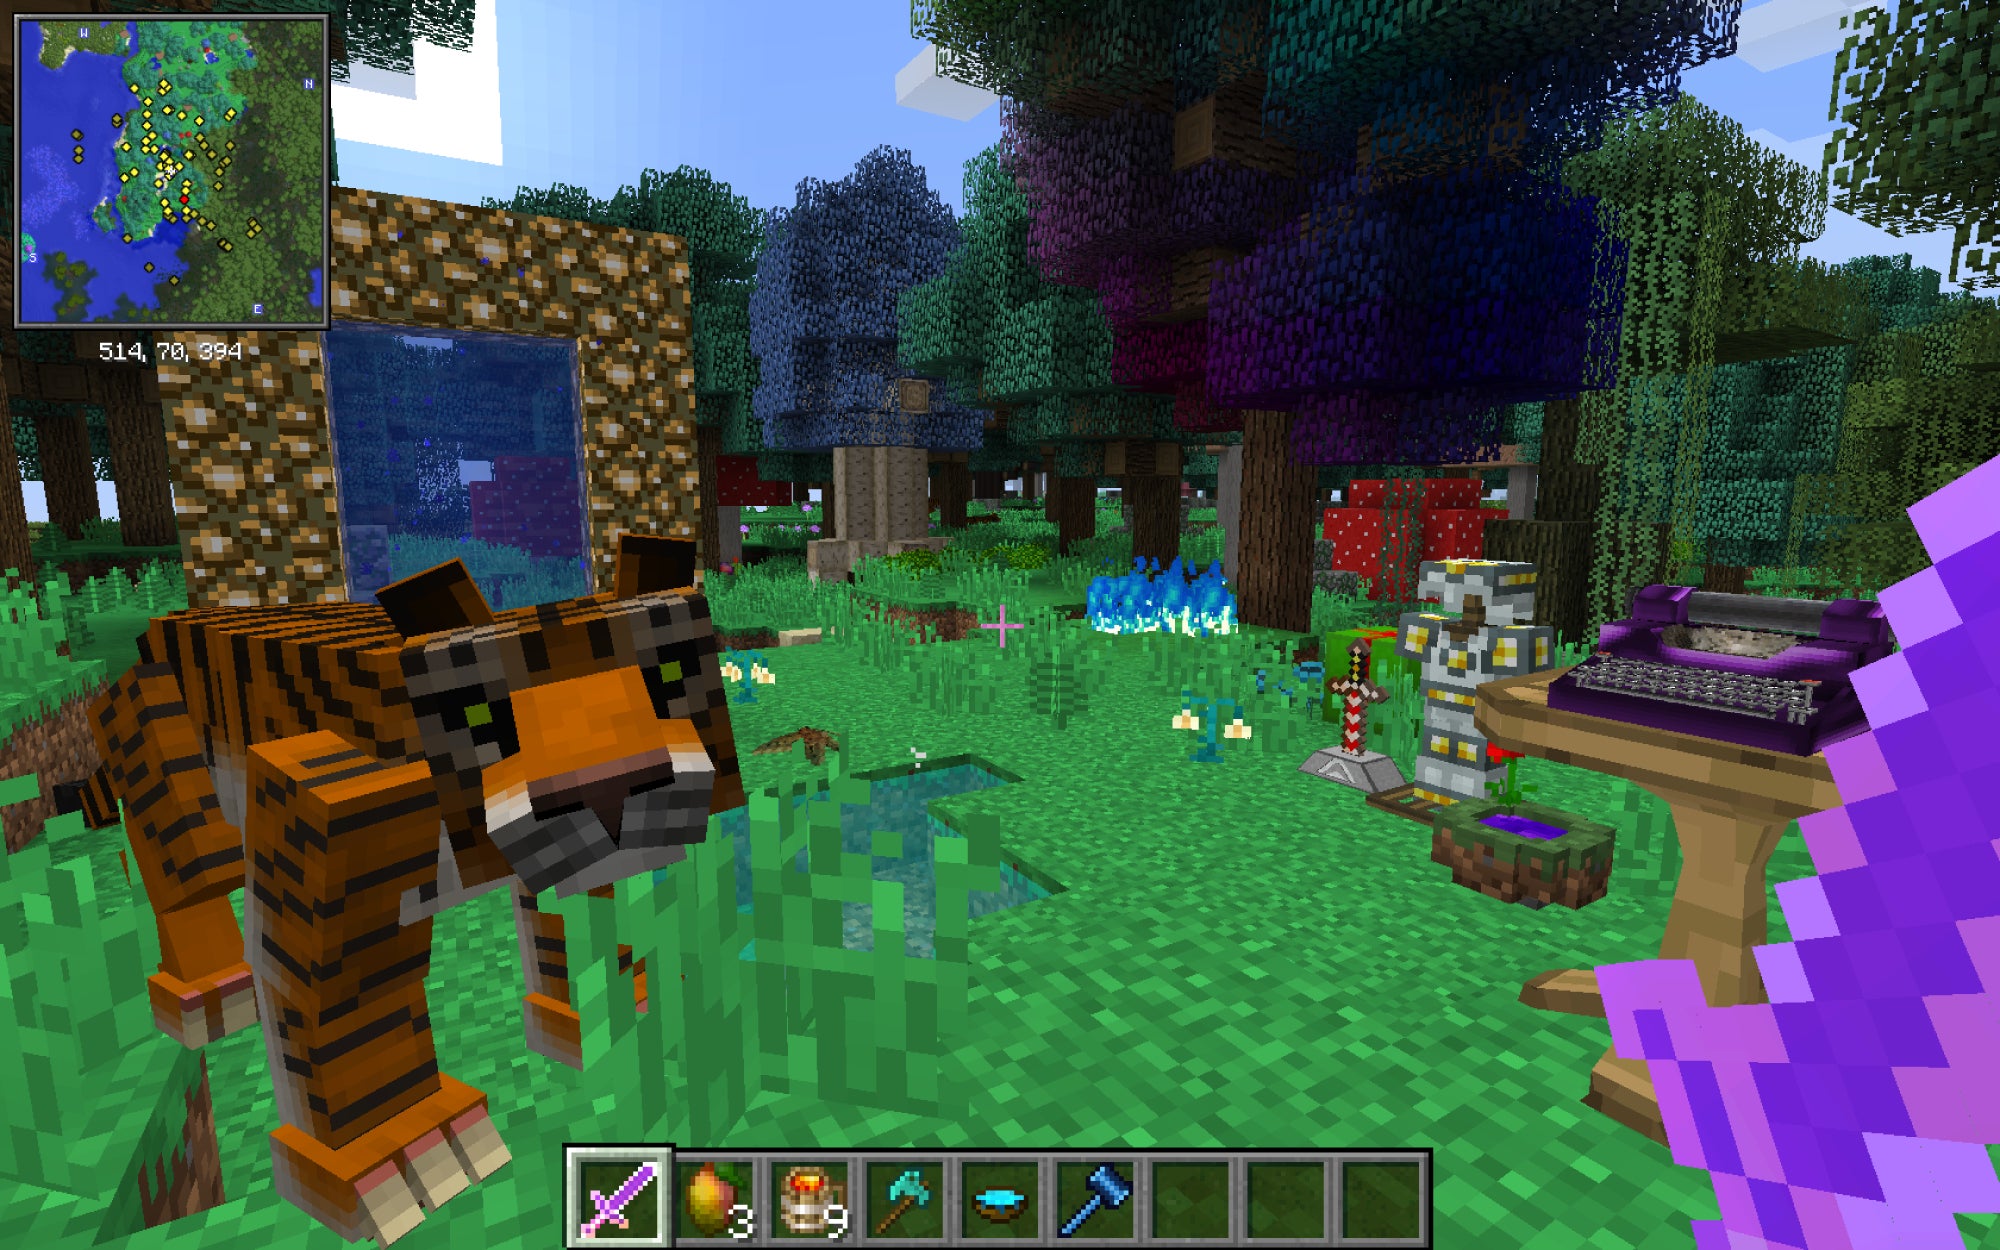 Customize your Minecraft experience by installing a creeper-load of mods